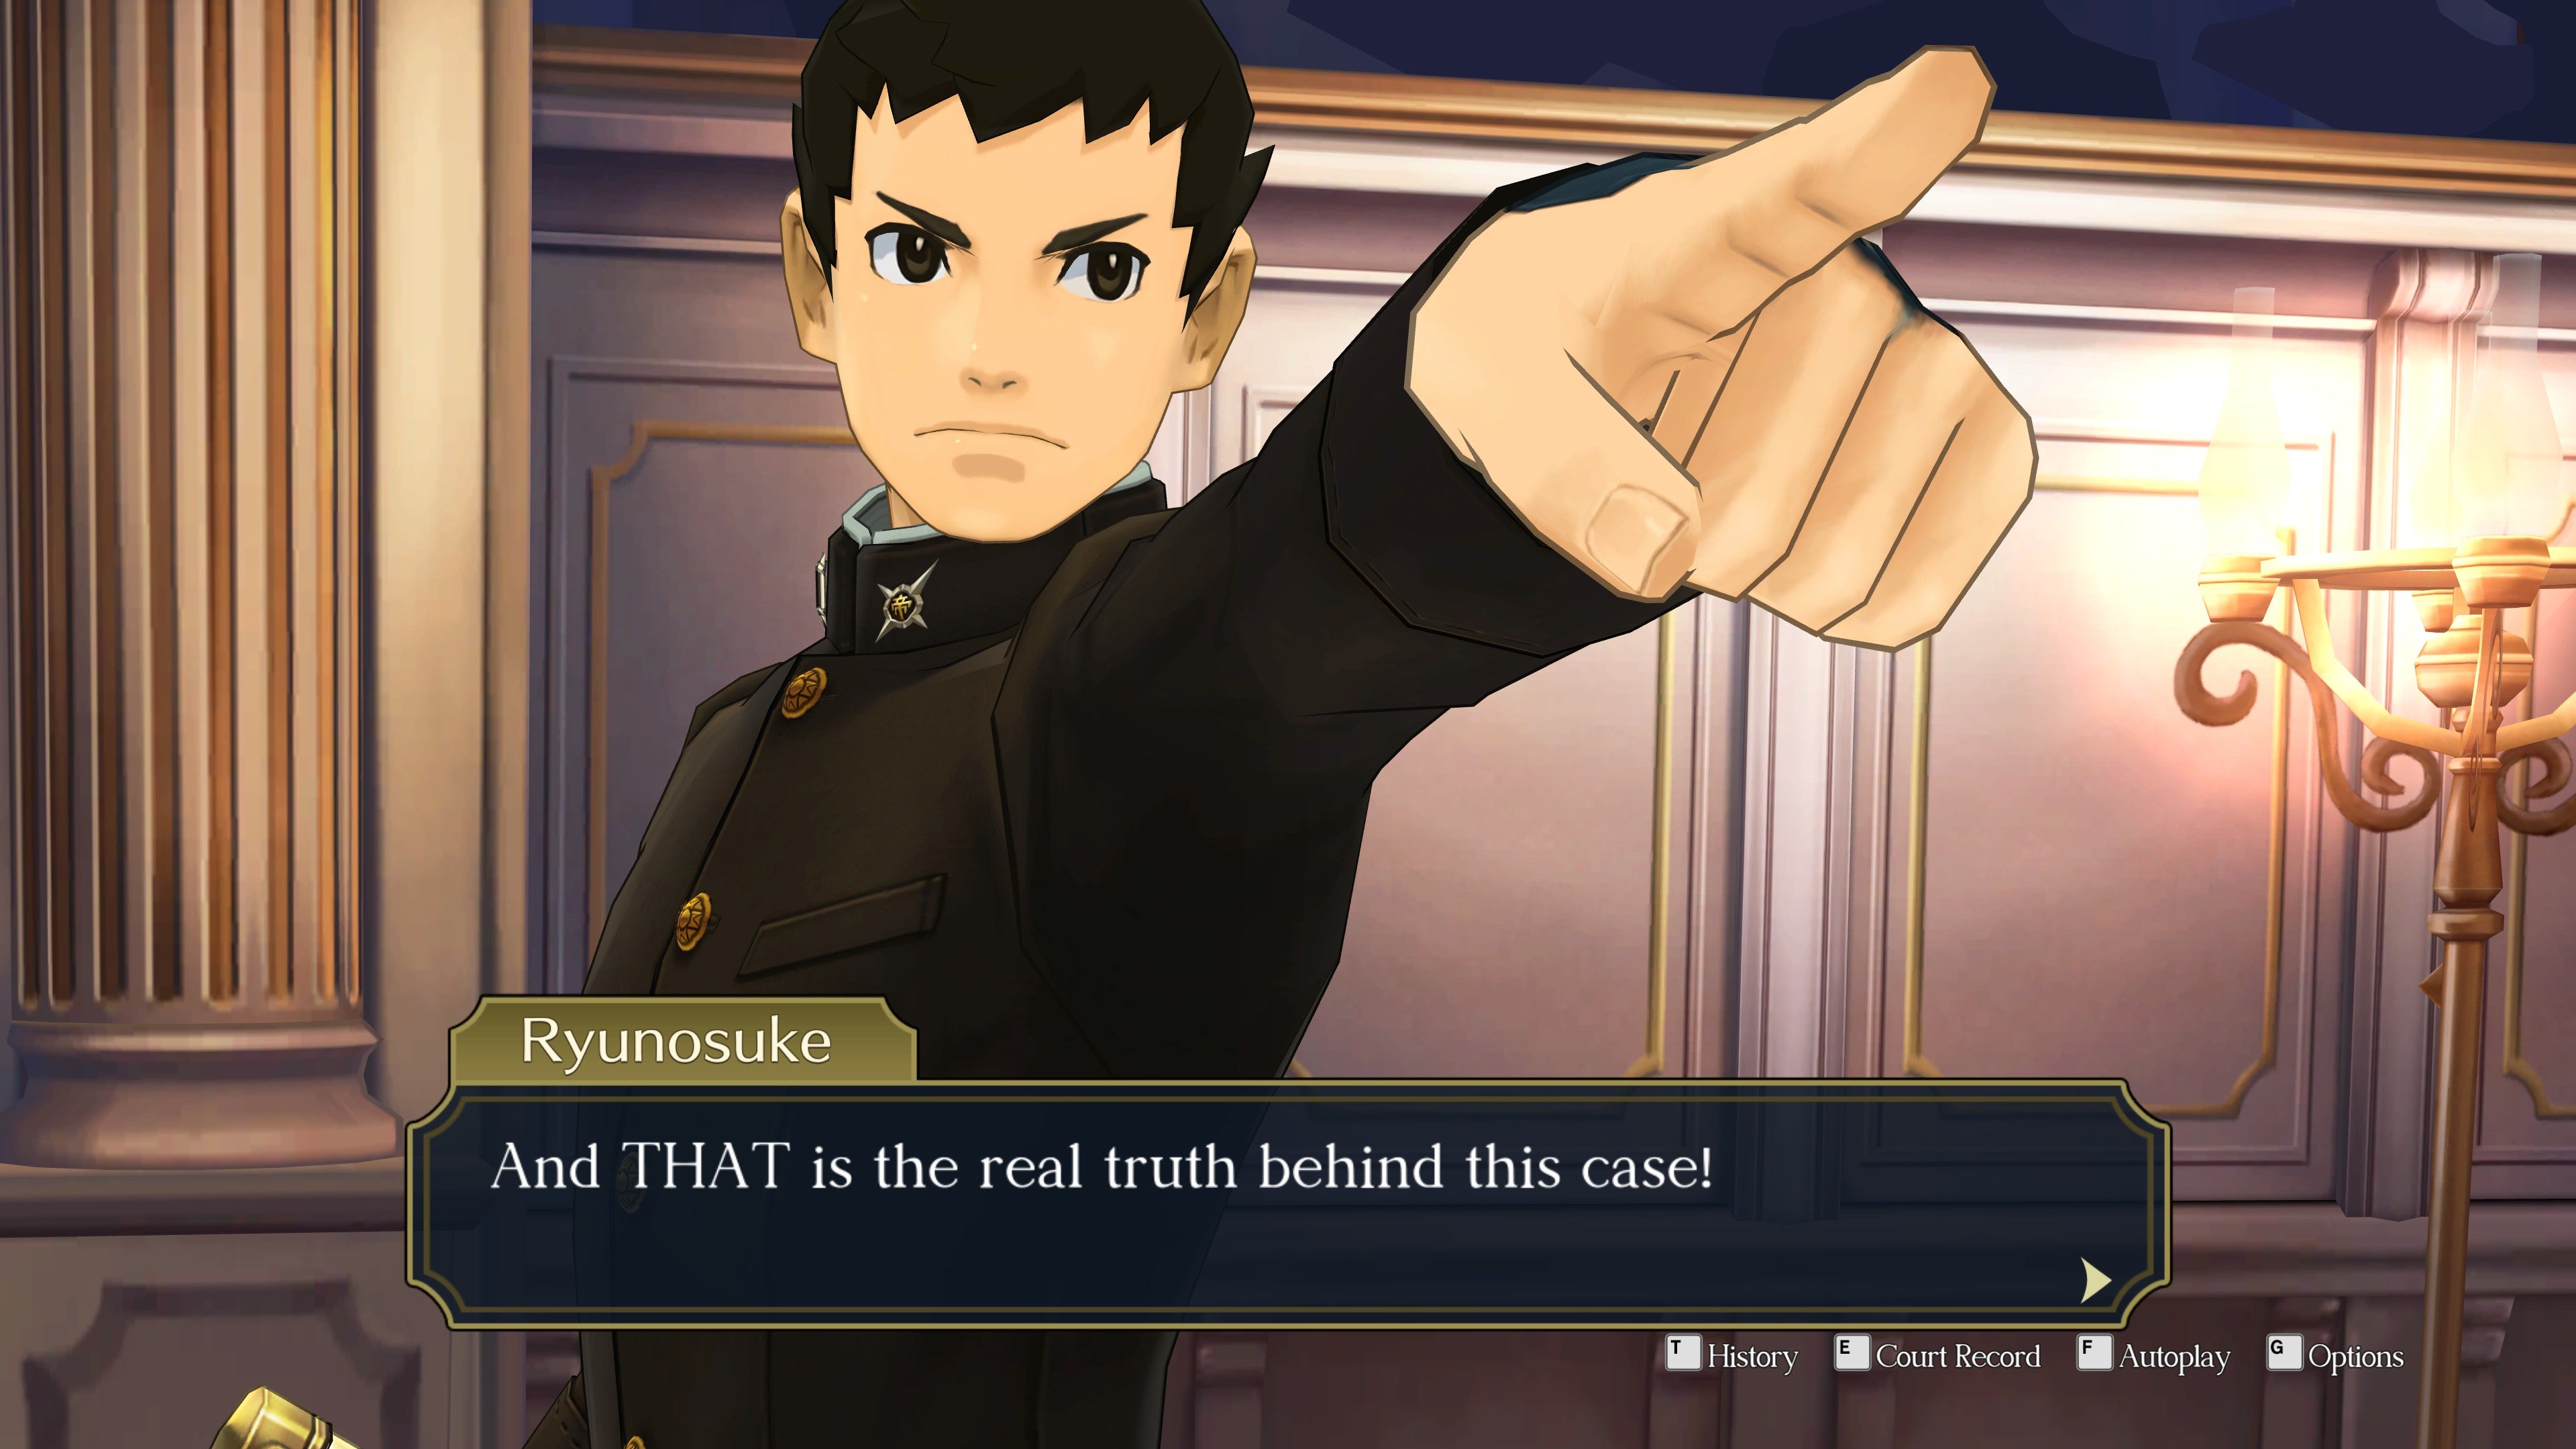 Ryunosuke points his finger in The Great Ace Attorney Chronicles